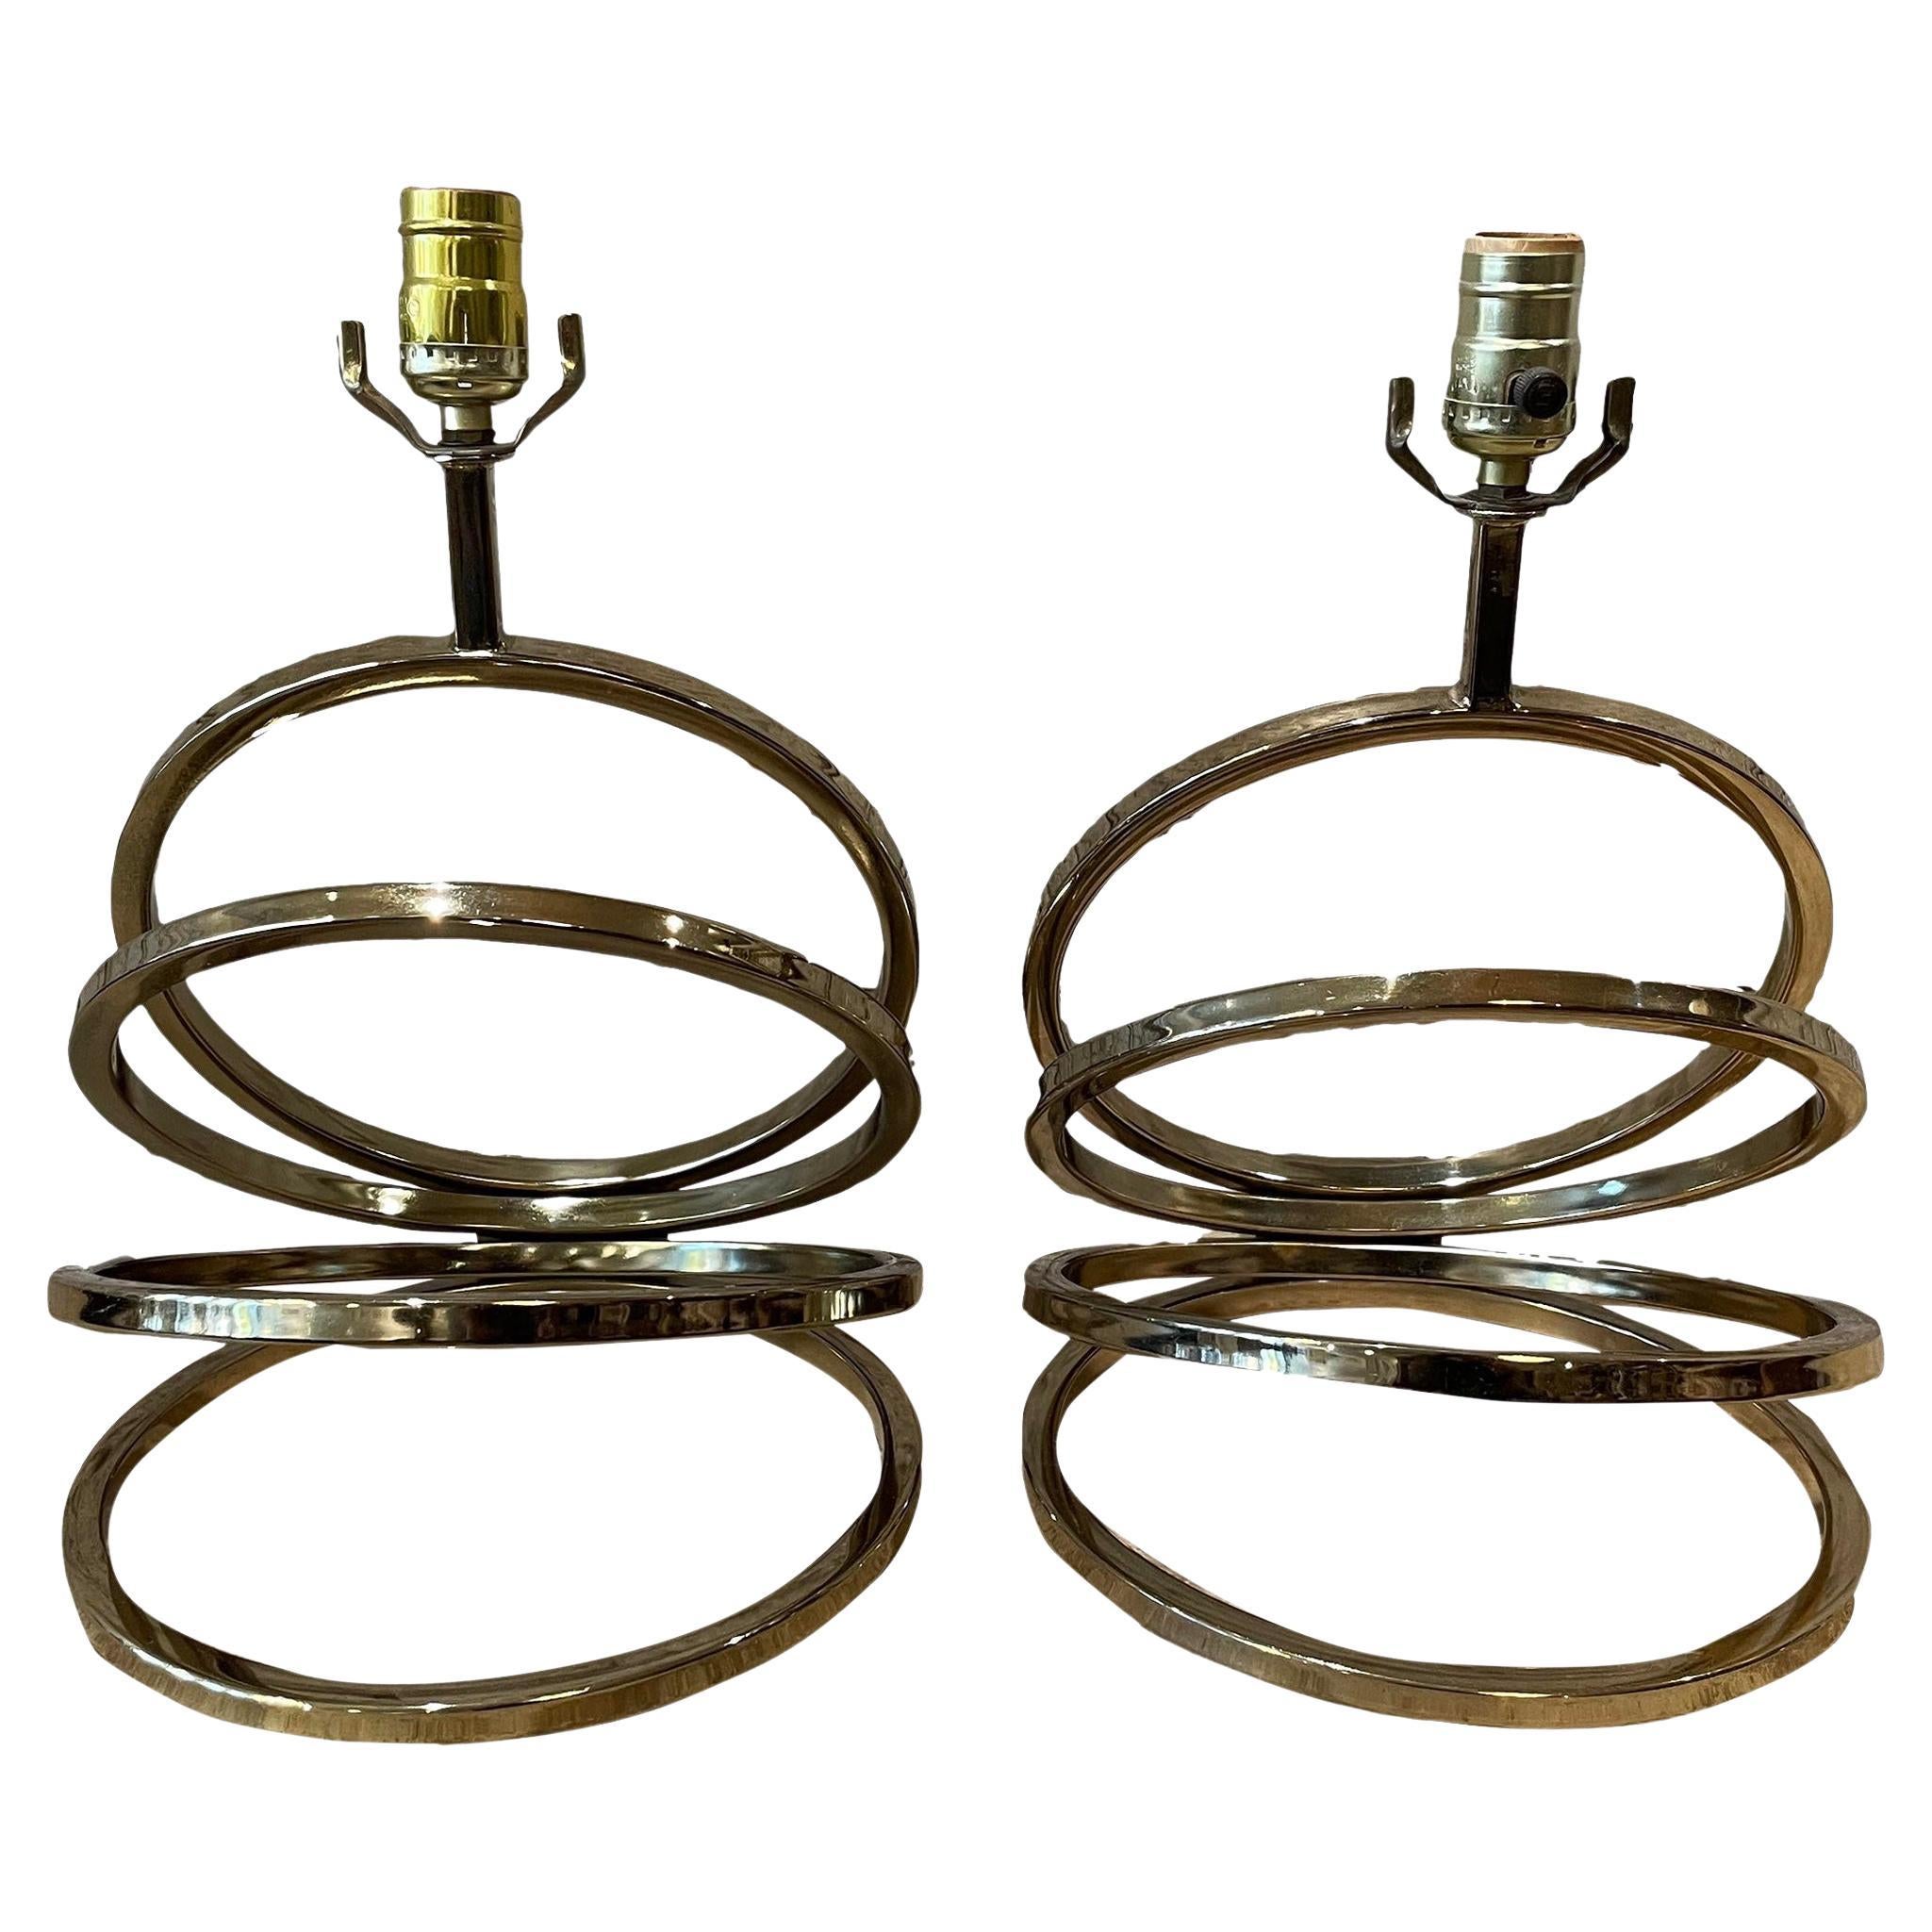 1960s Hollywood Regency Mid Century Vintage Brass Spiral Lamps - a Pair